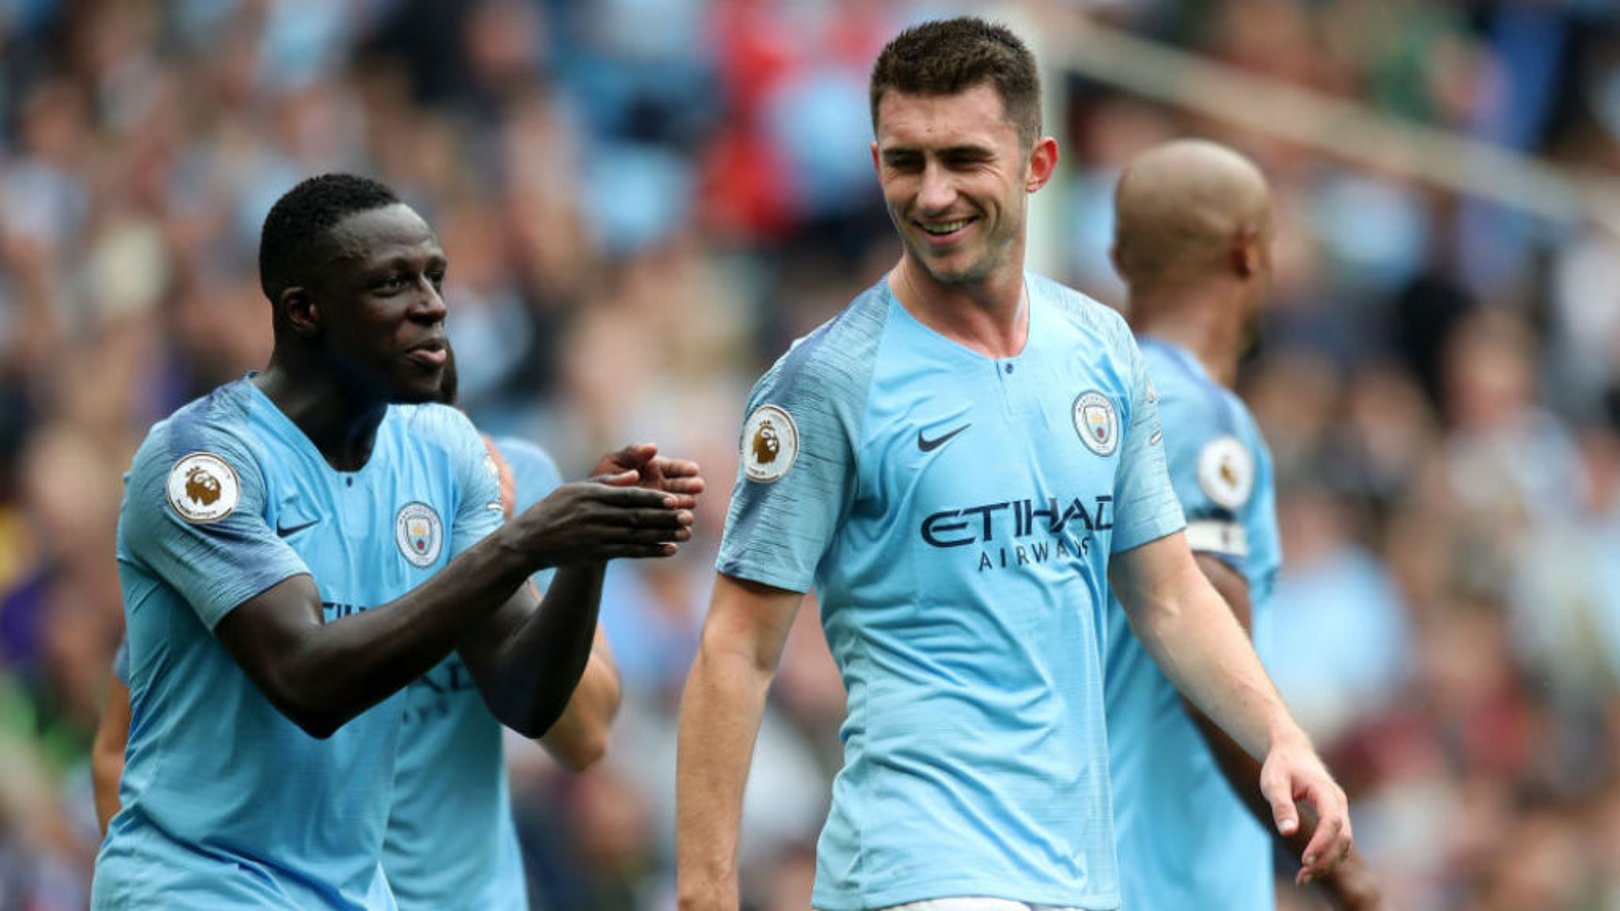 City's rock-solid rearguard